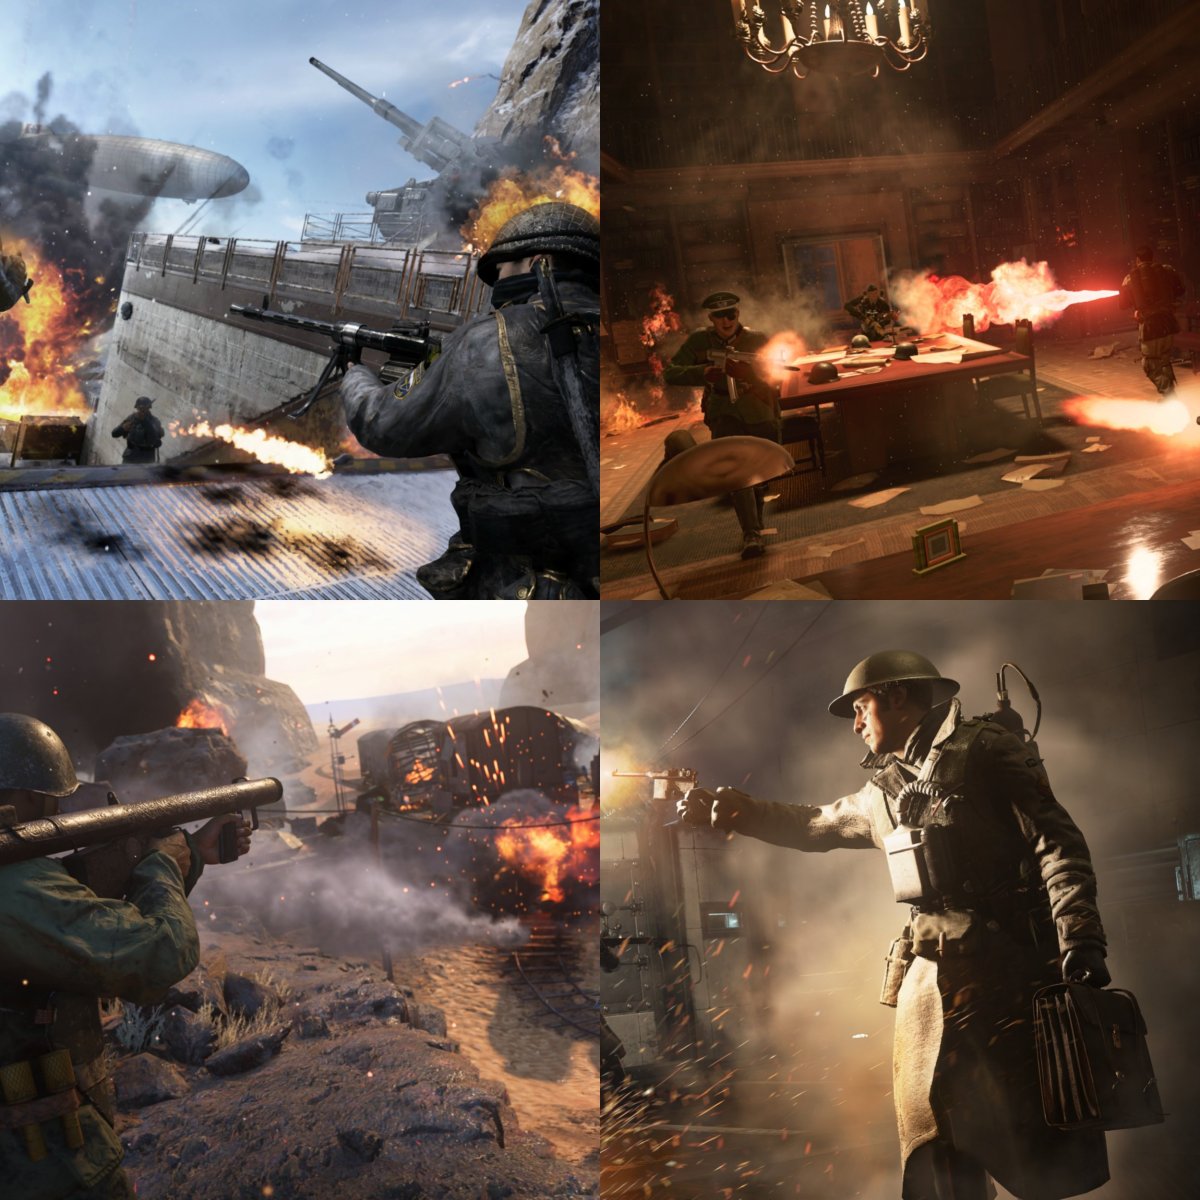 Call of Duty®: WWII